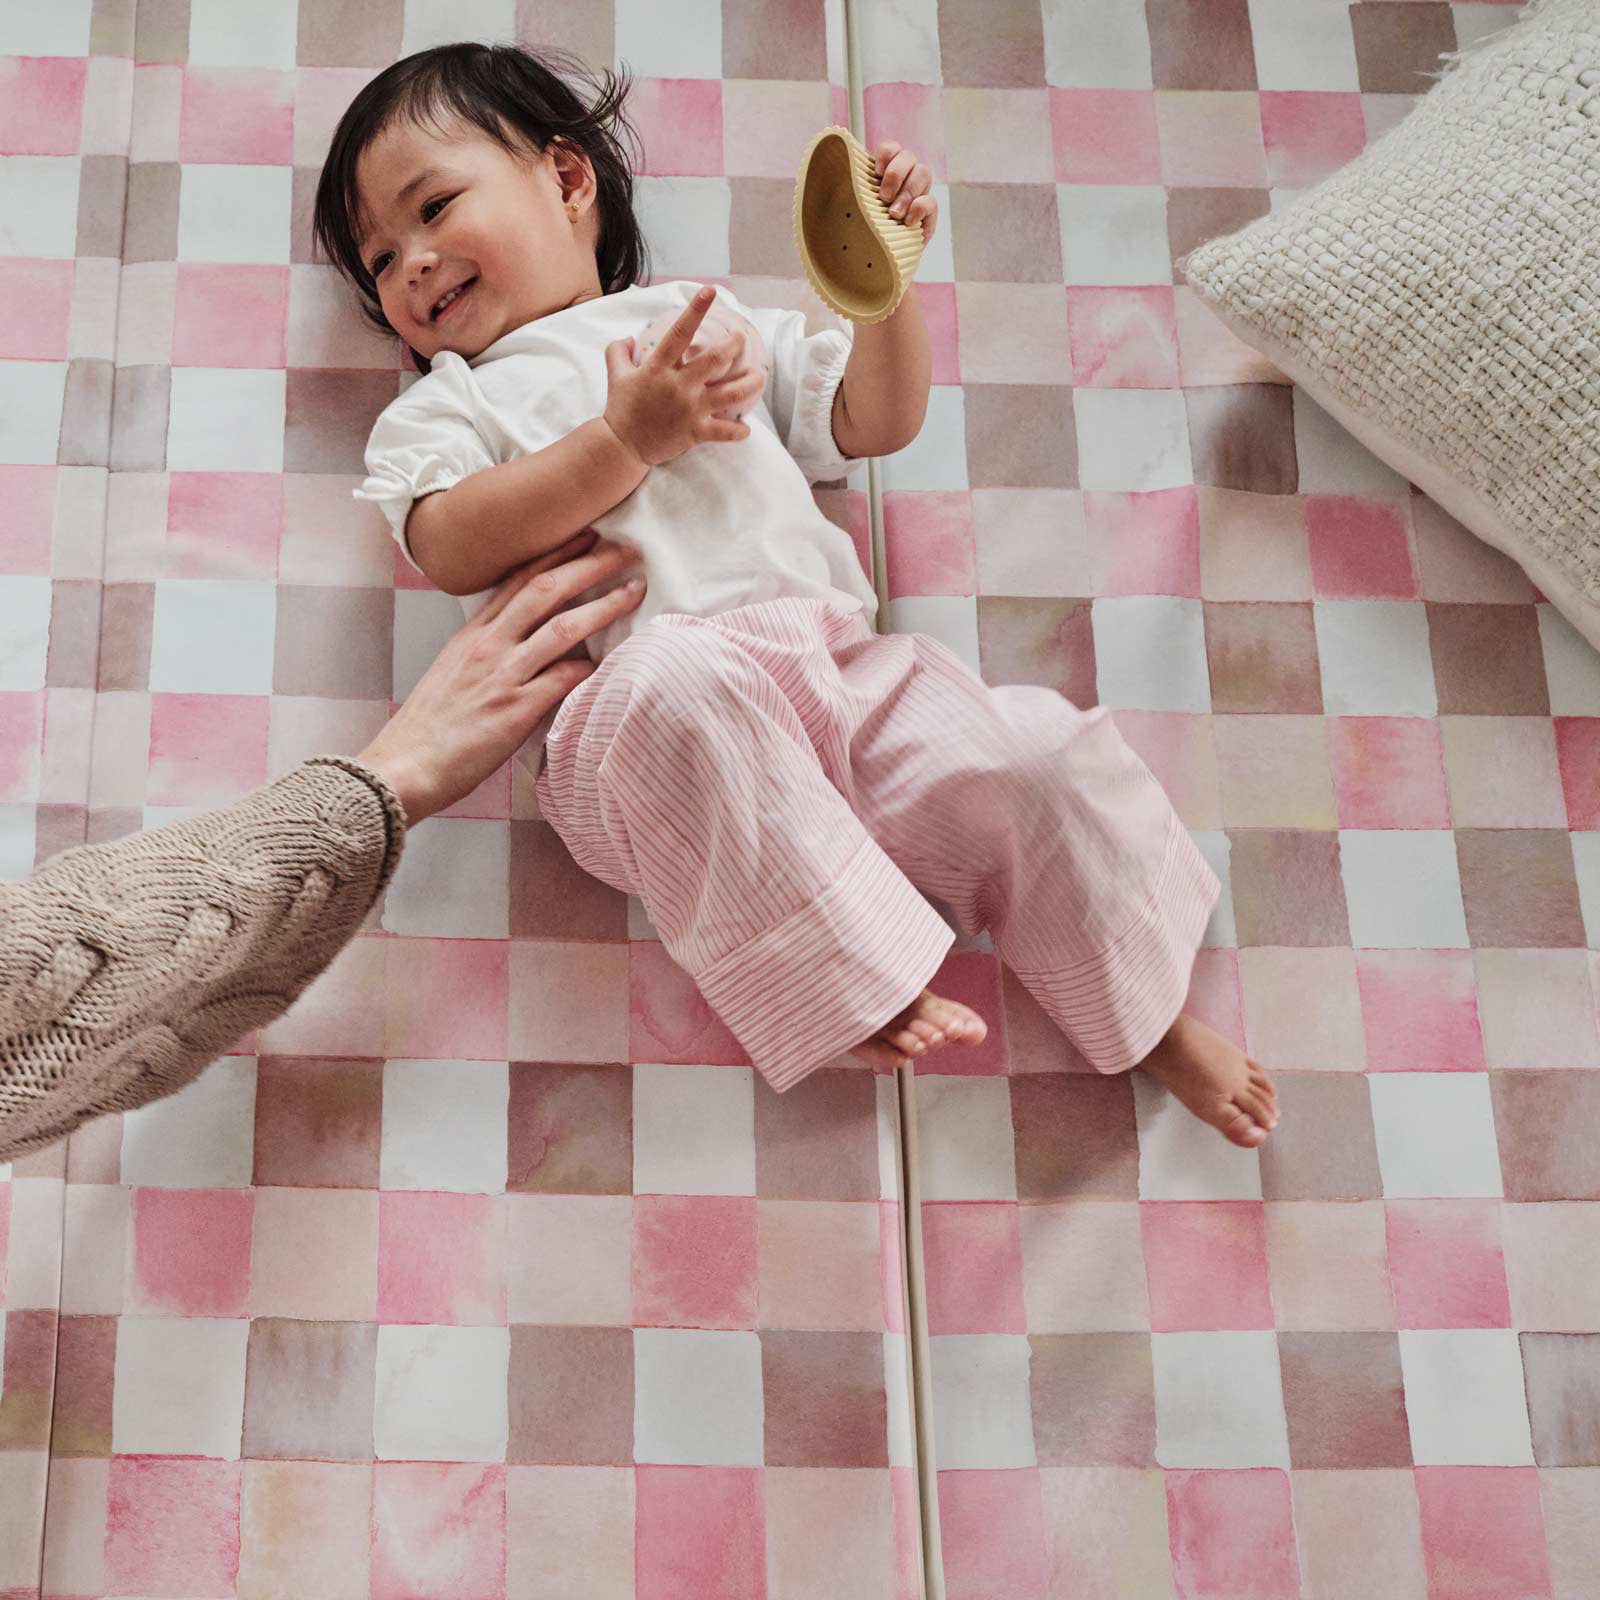 Neapolitan pink and brown gingham print tumbling mat shown with toddler girl laying on the mat playing with a toy being tickled